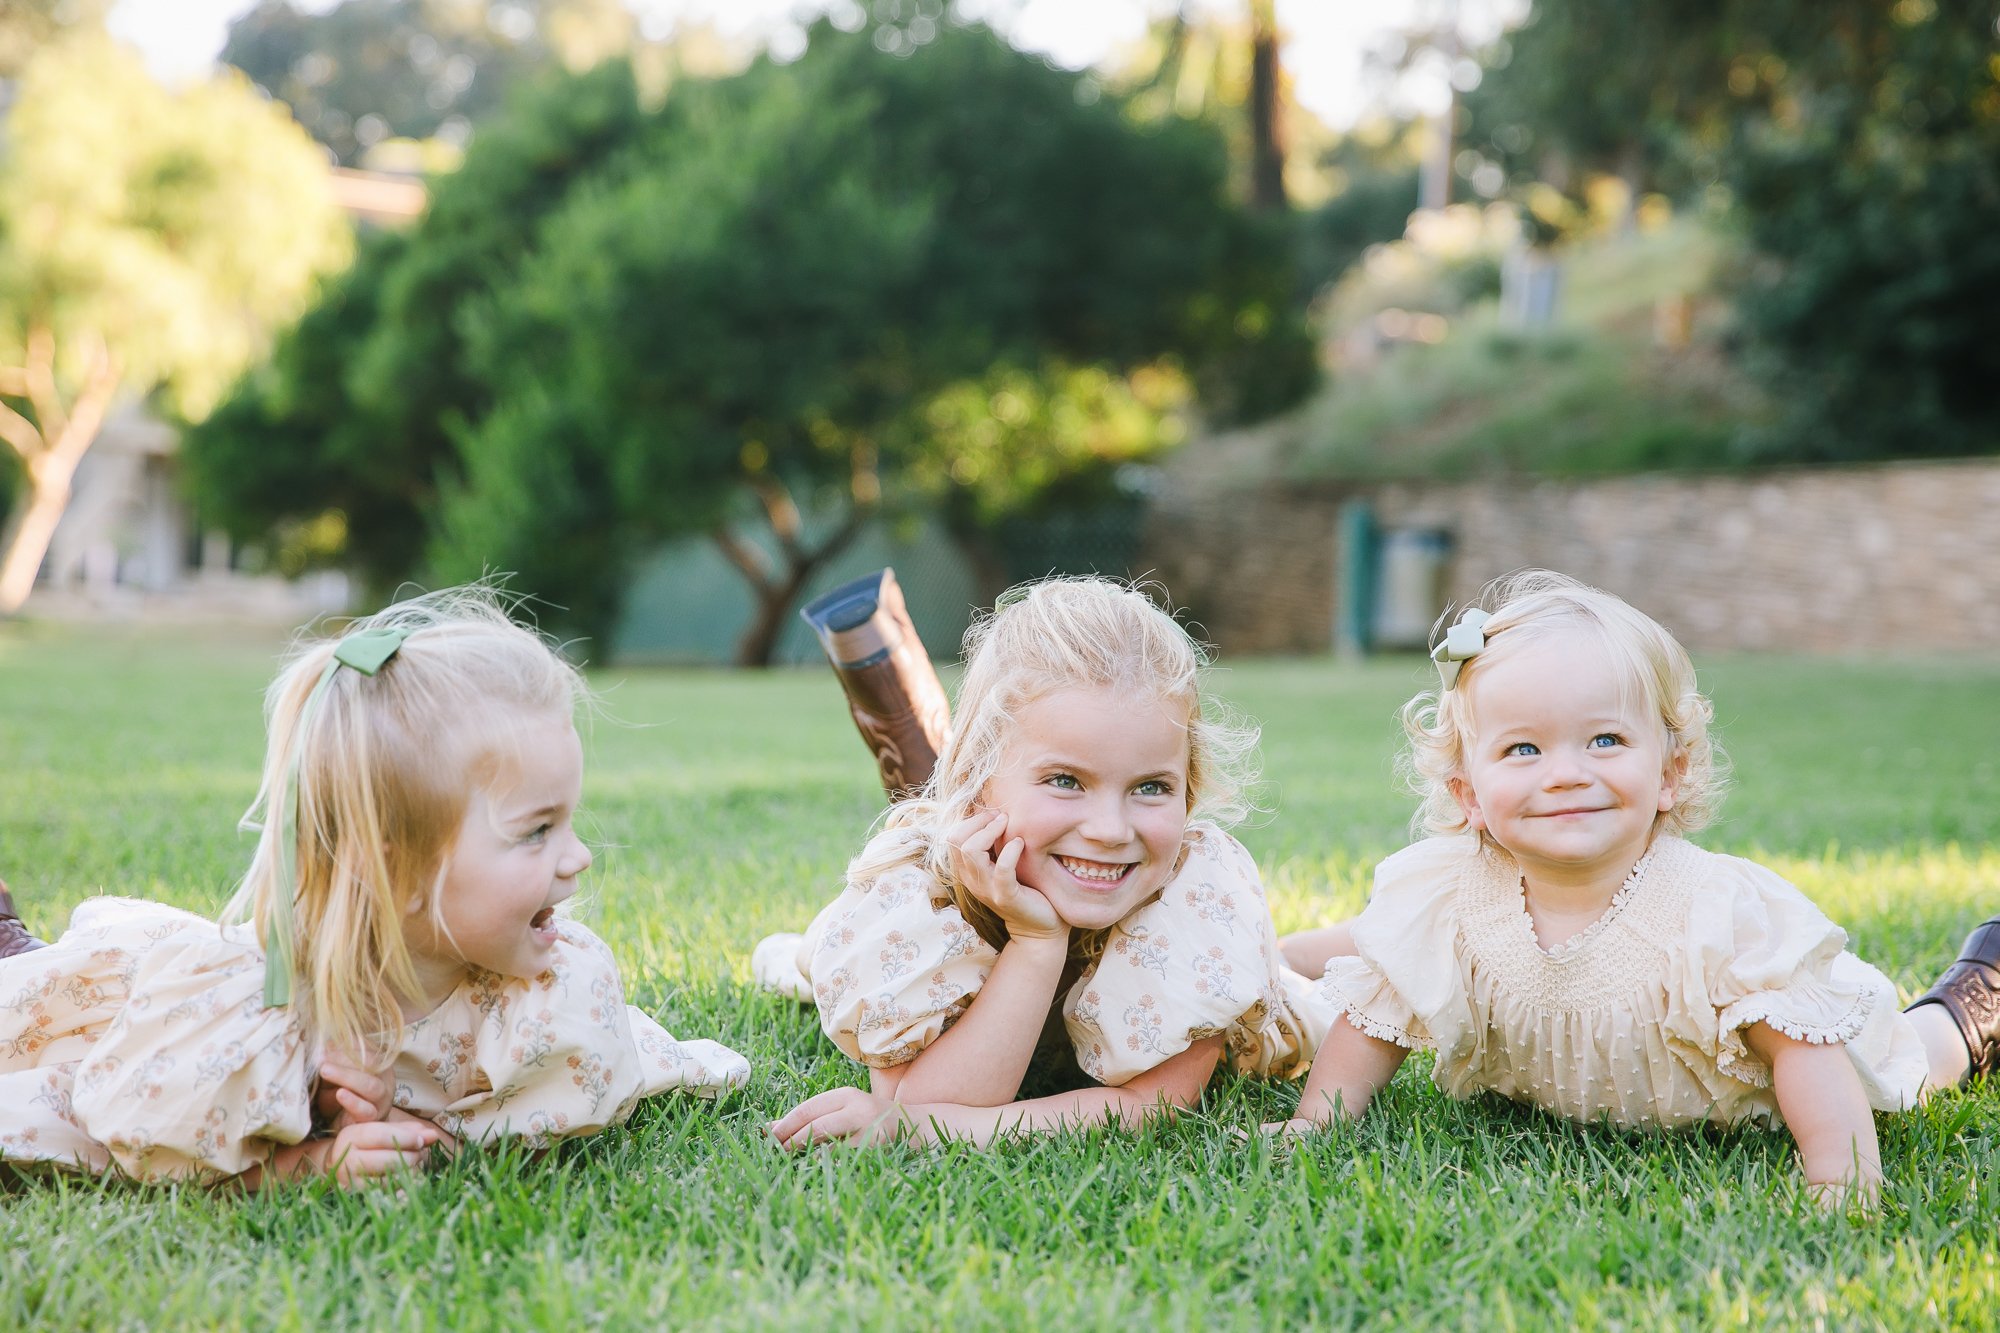 Los_Angeles_Family_Photographer_Golden_Hour_Mini_Session_Fall_Photos_Holiday_Card_Kids_Babies_Children_Luxury_Best_California_Photography-0096.jpg